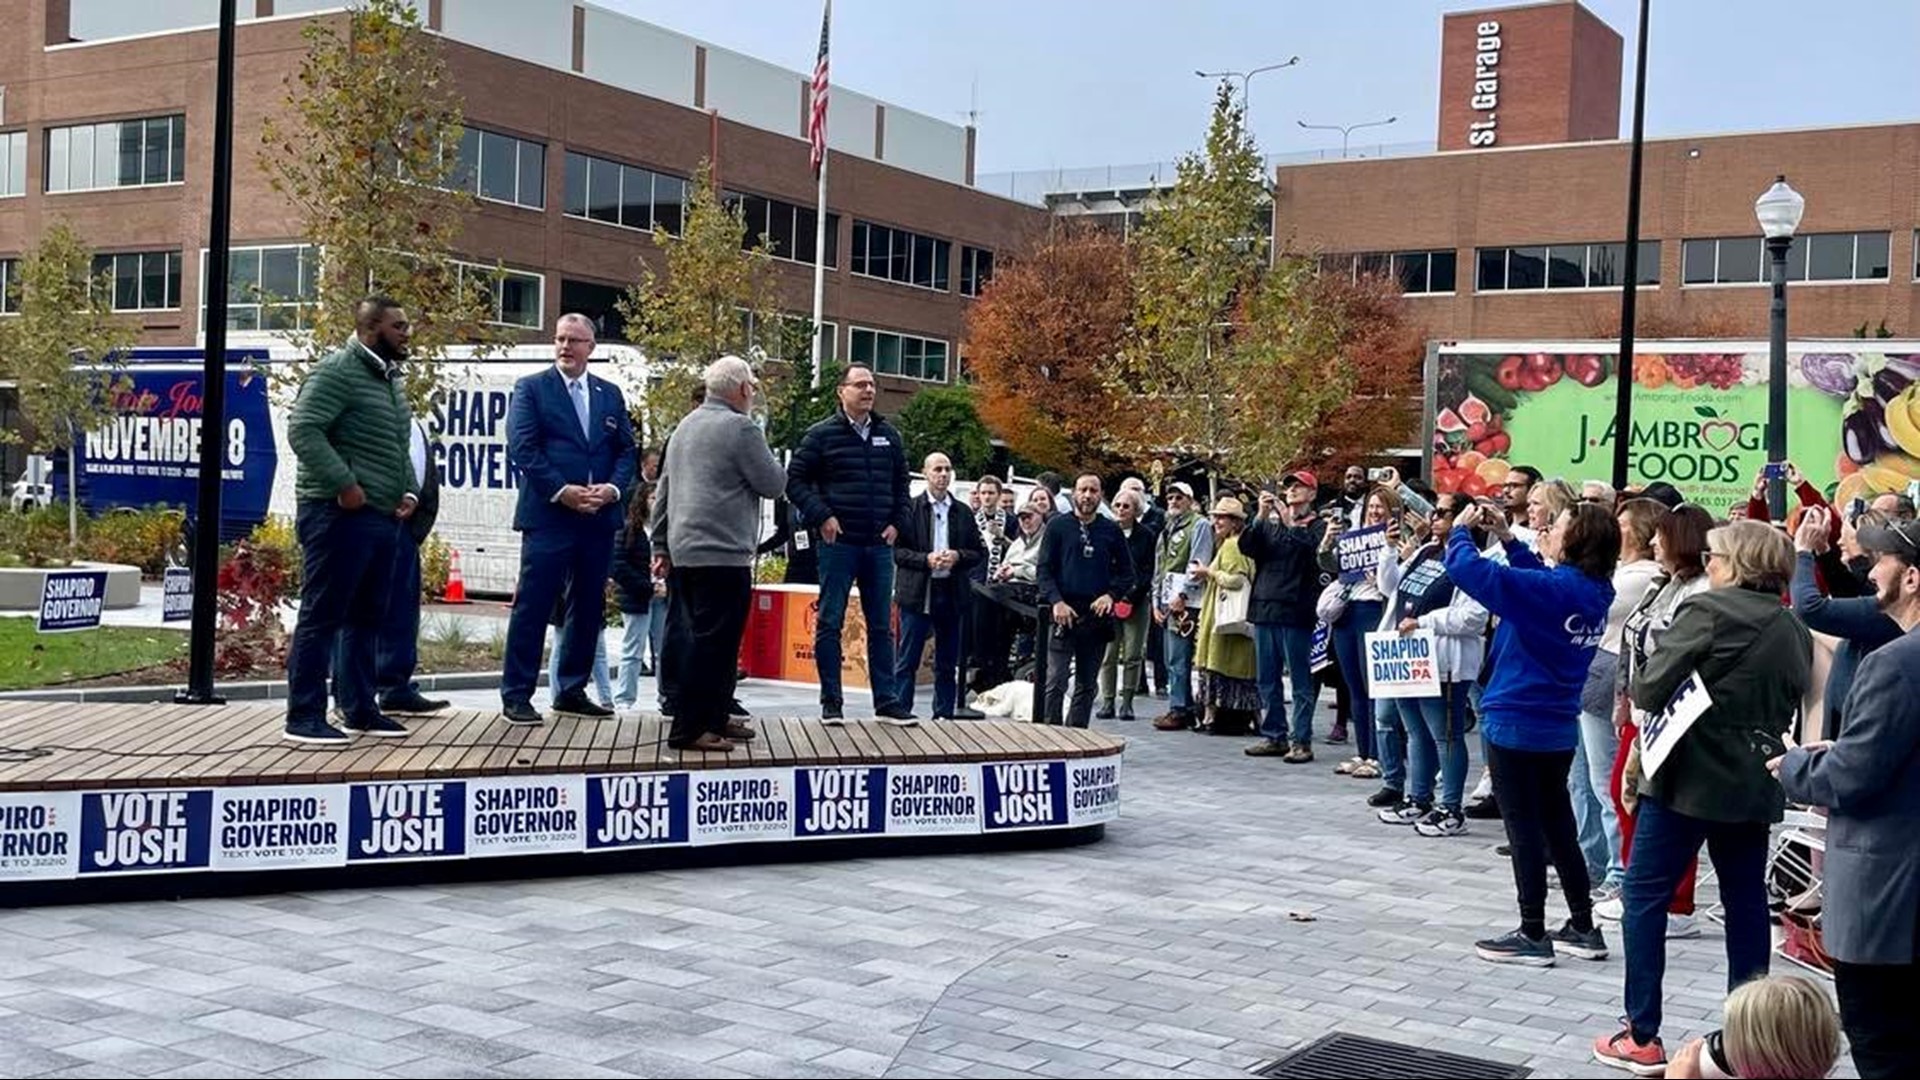 Shapiro got an early start Friday morning in Lancaster. It was his first rally of four, held across Lancaster, Lehigh, Monroe and Luzerne Counties.